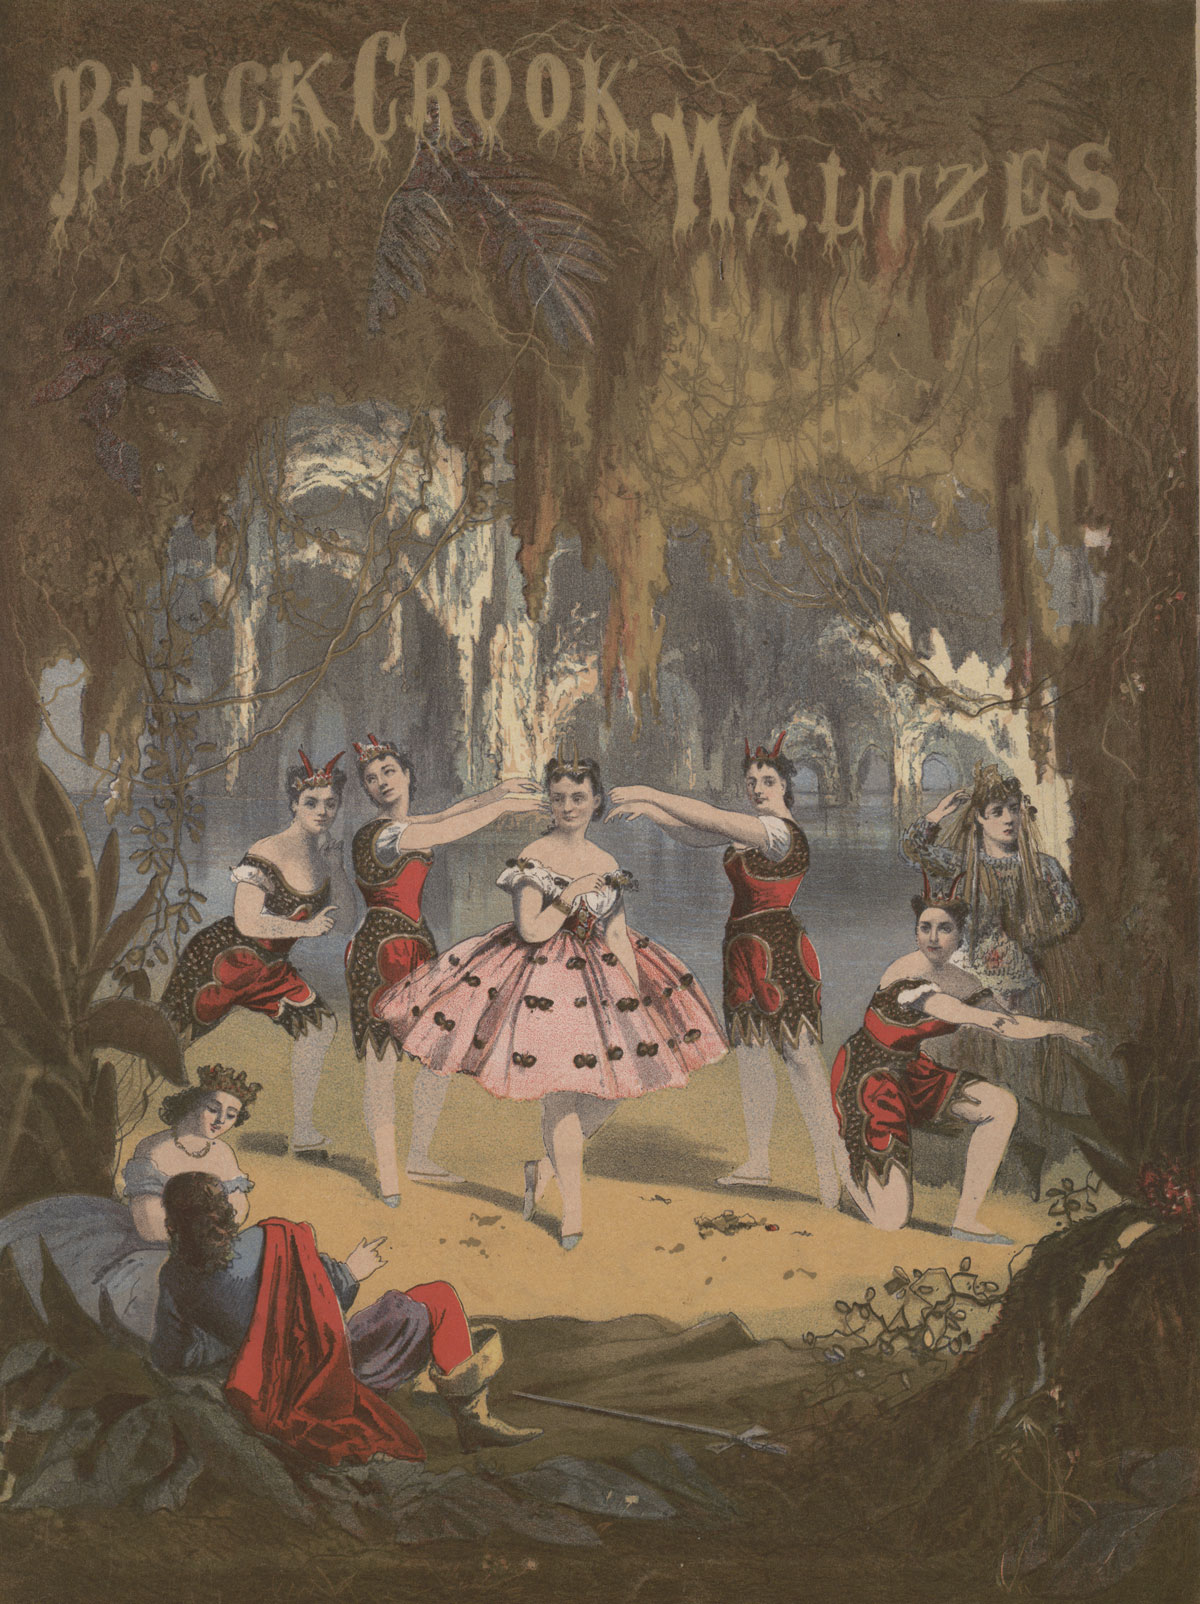 Cover of sheet music for "The Black Crook Waltzes,” 1867.